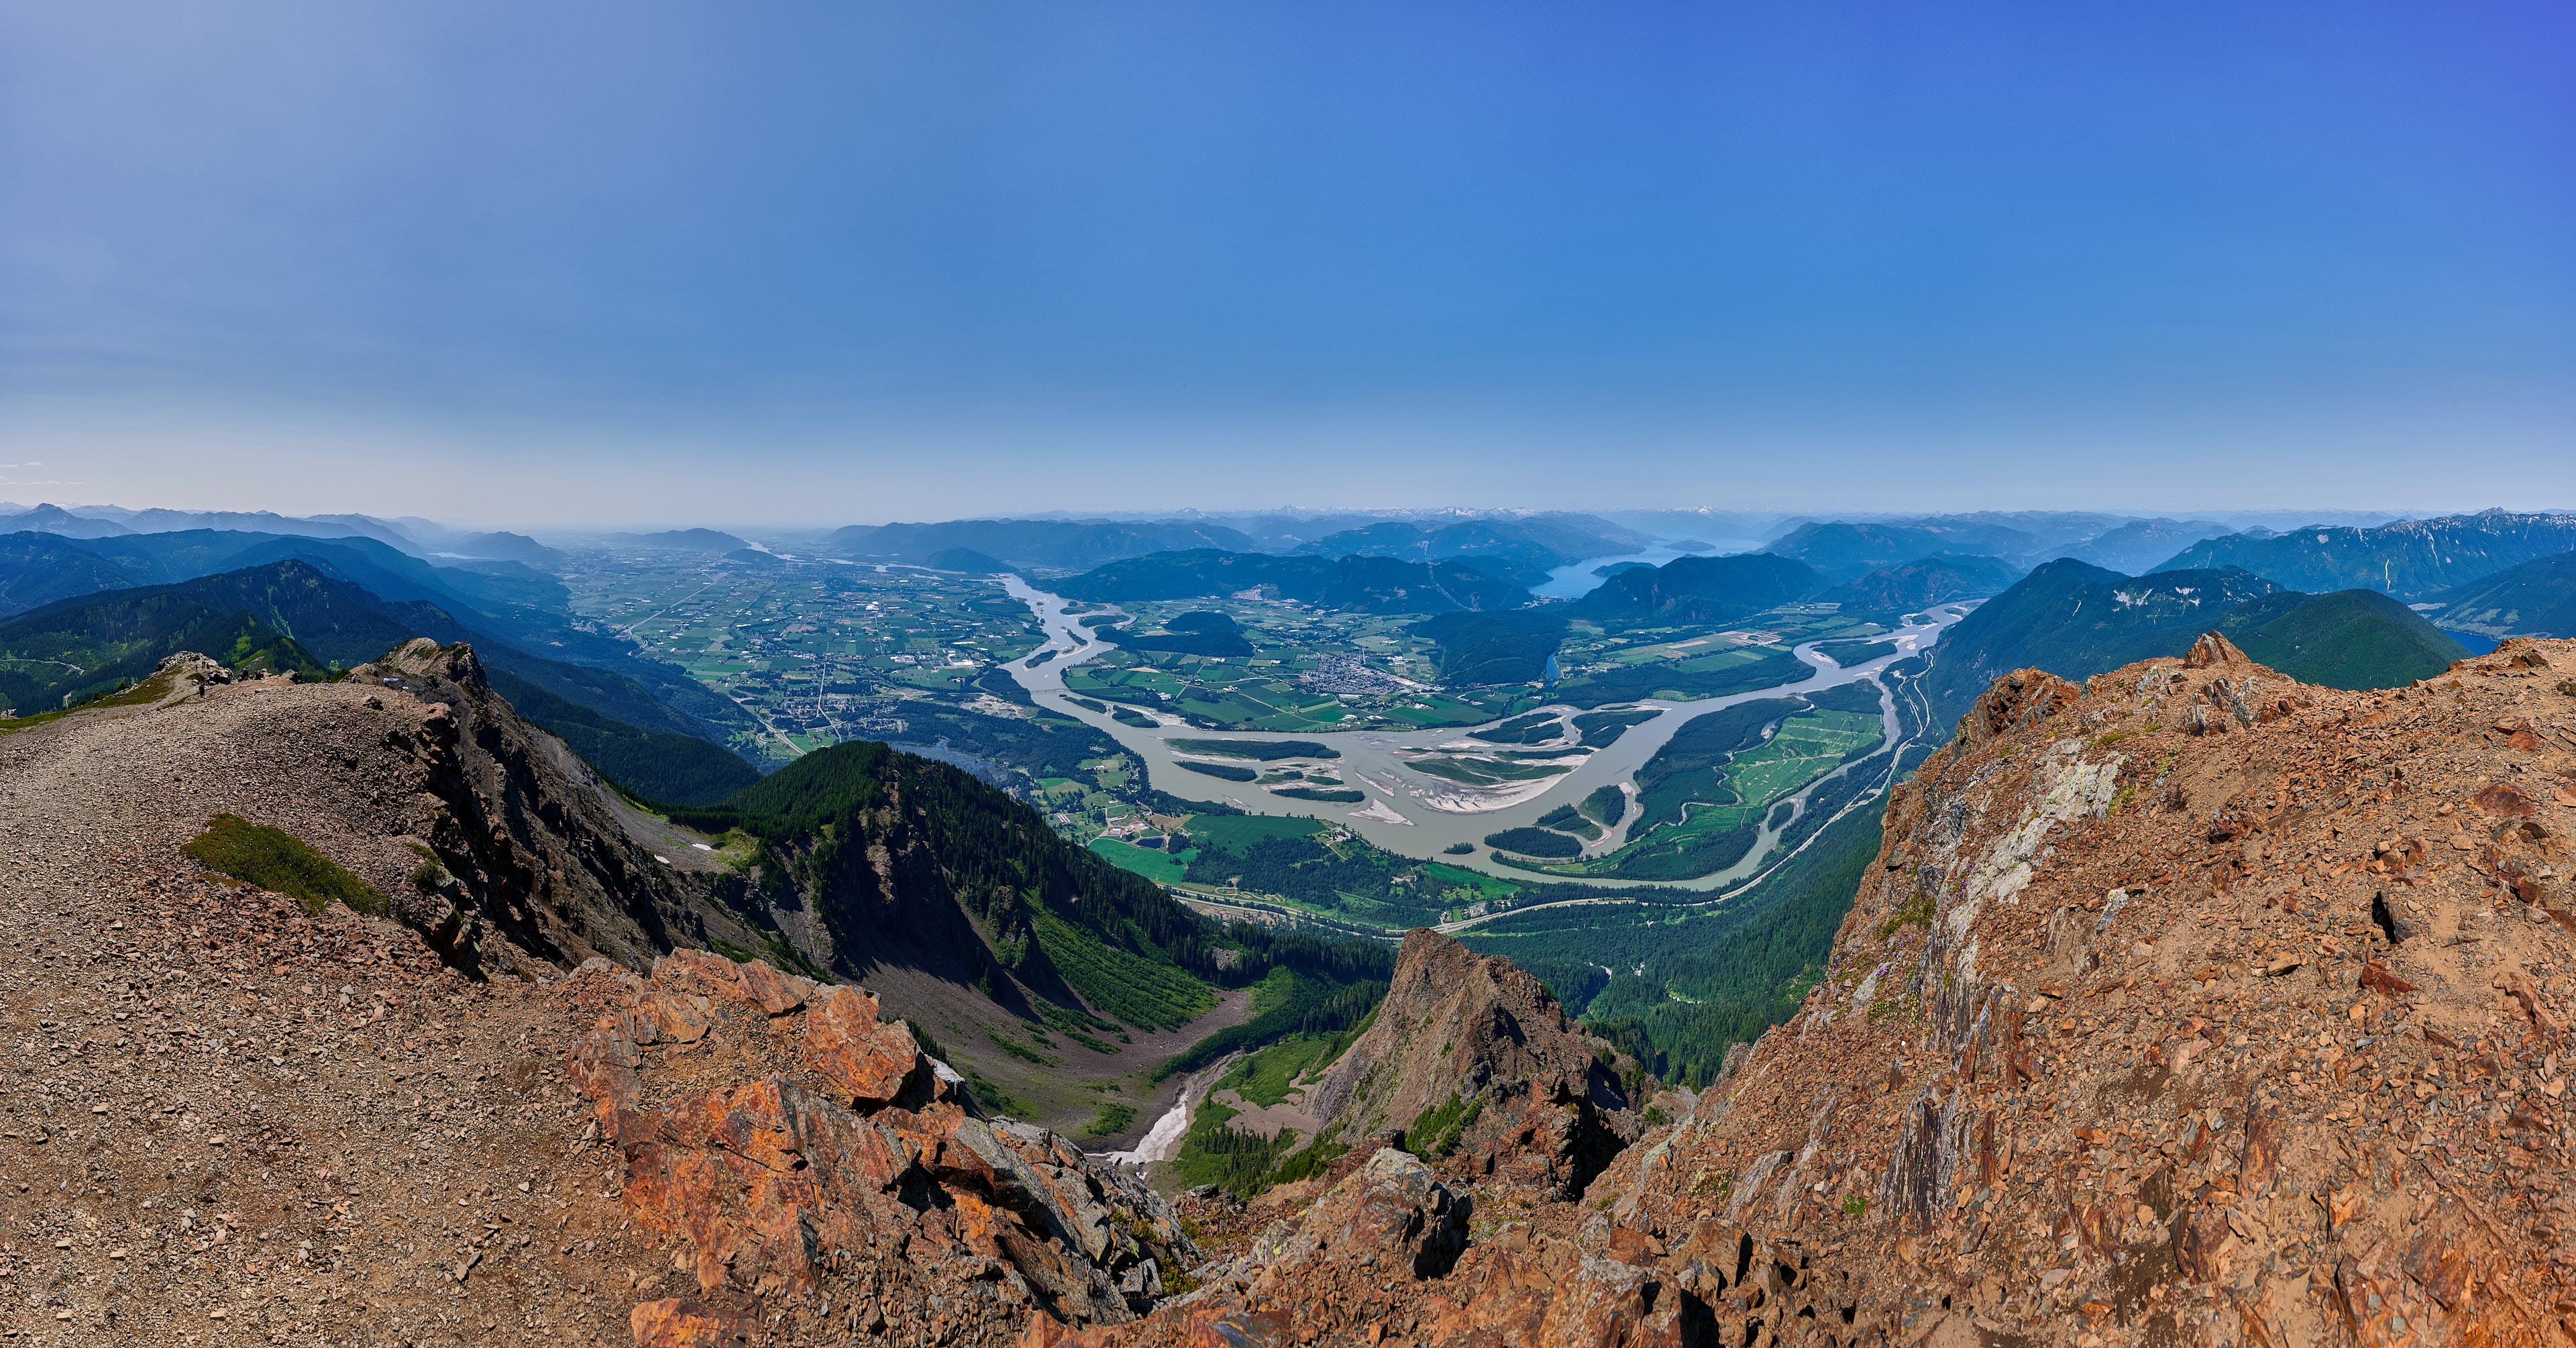 Cheam Peak Panorama with Nikon Z7 and Nikkor 14-30 f/4 S